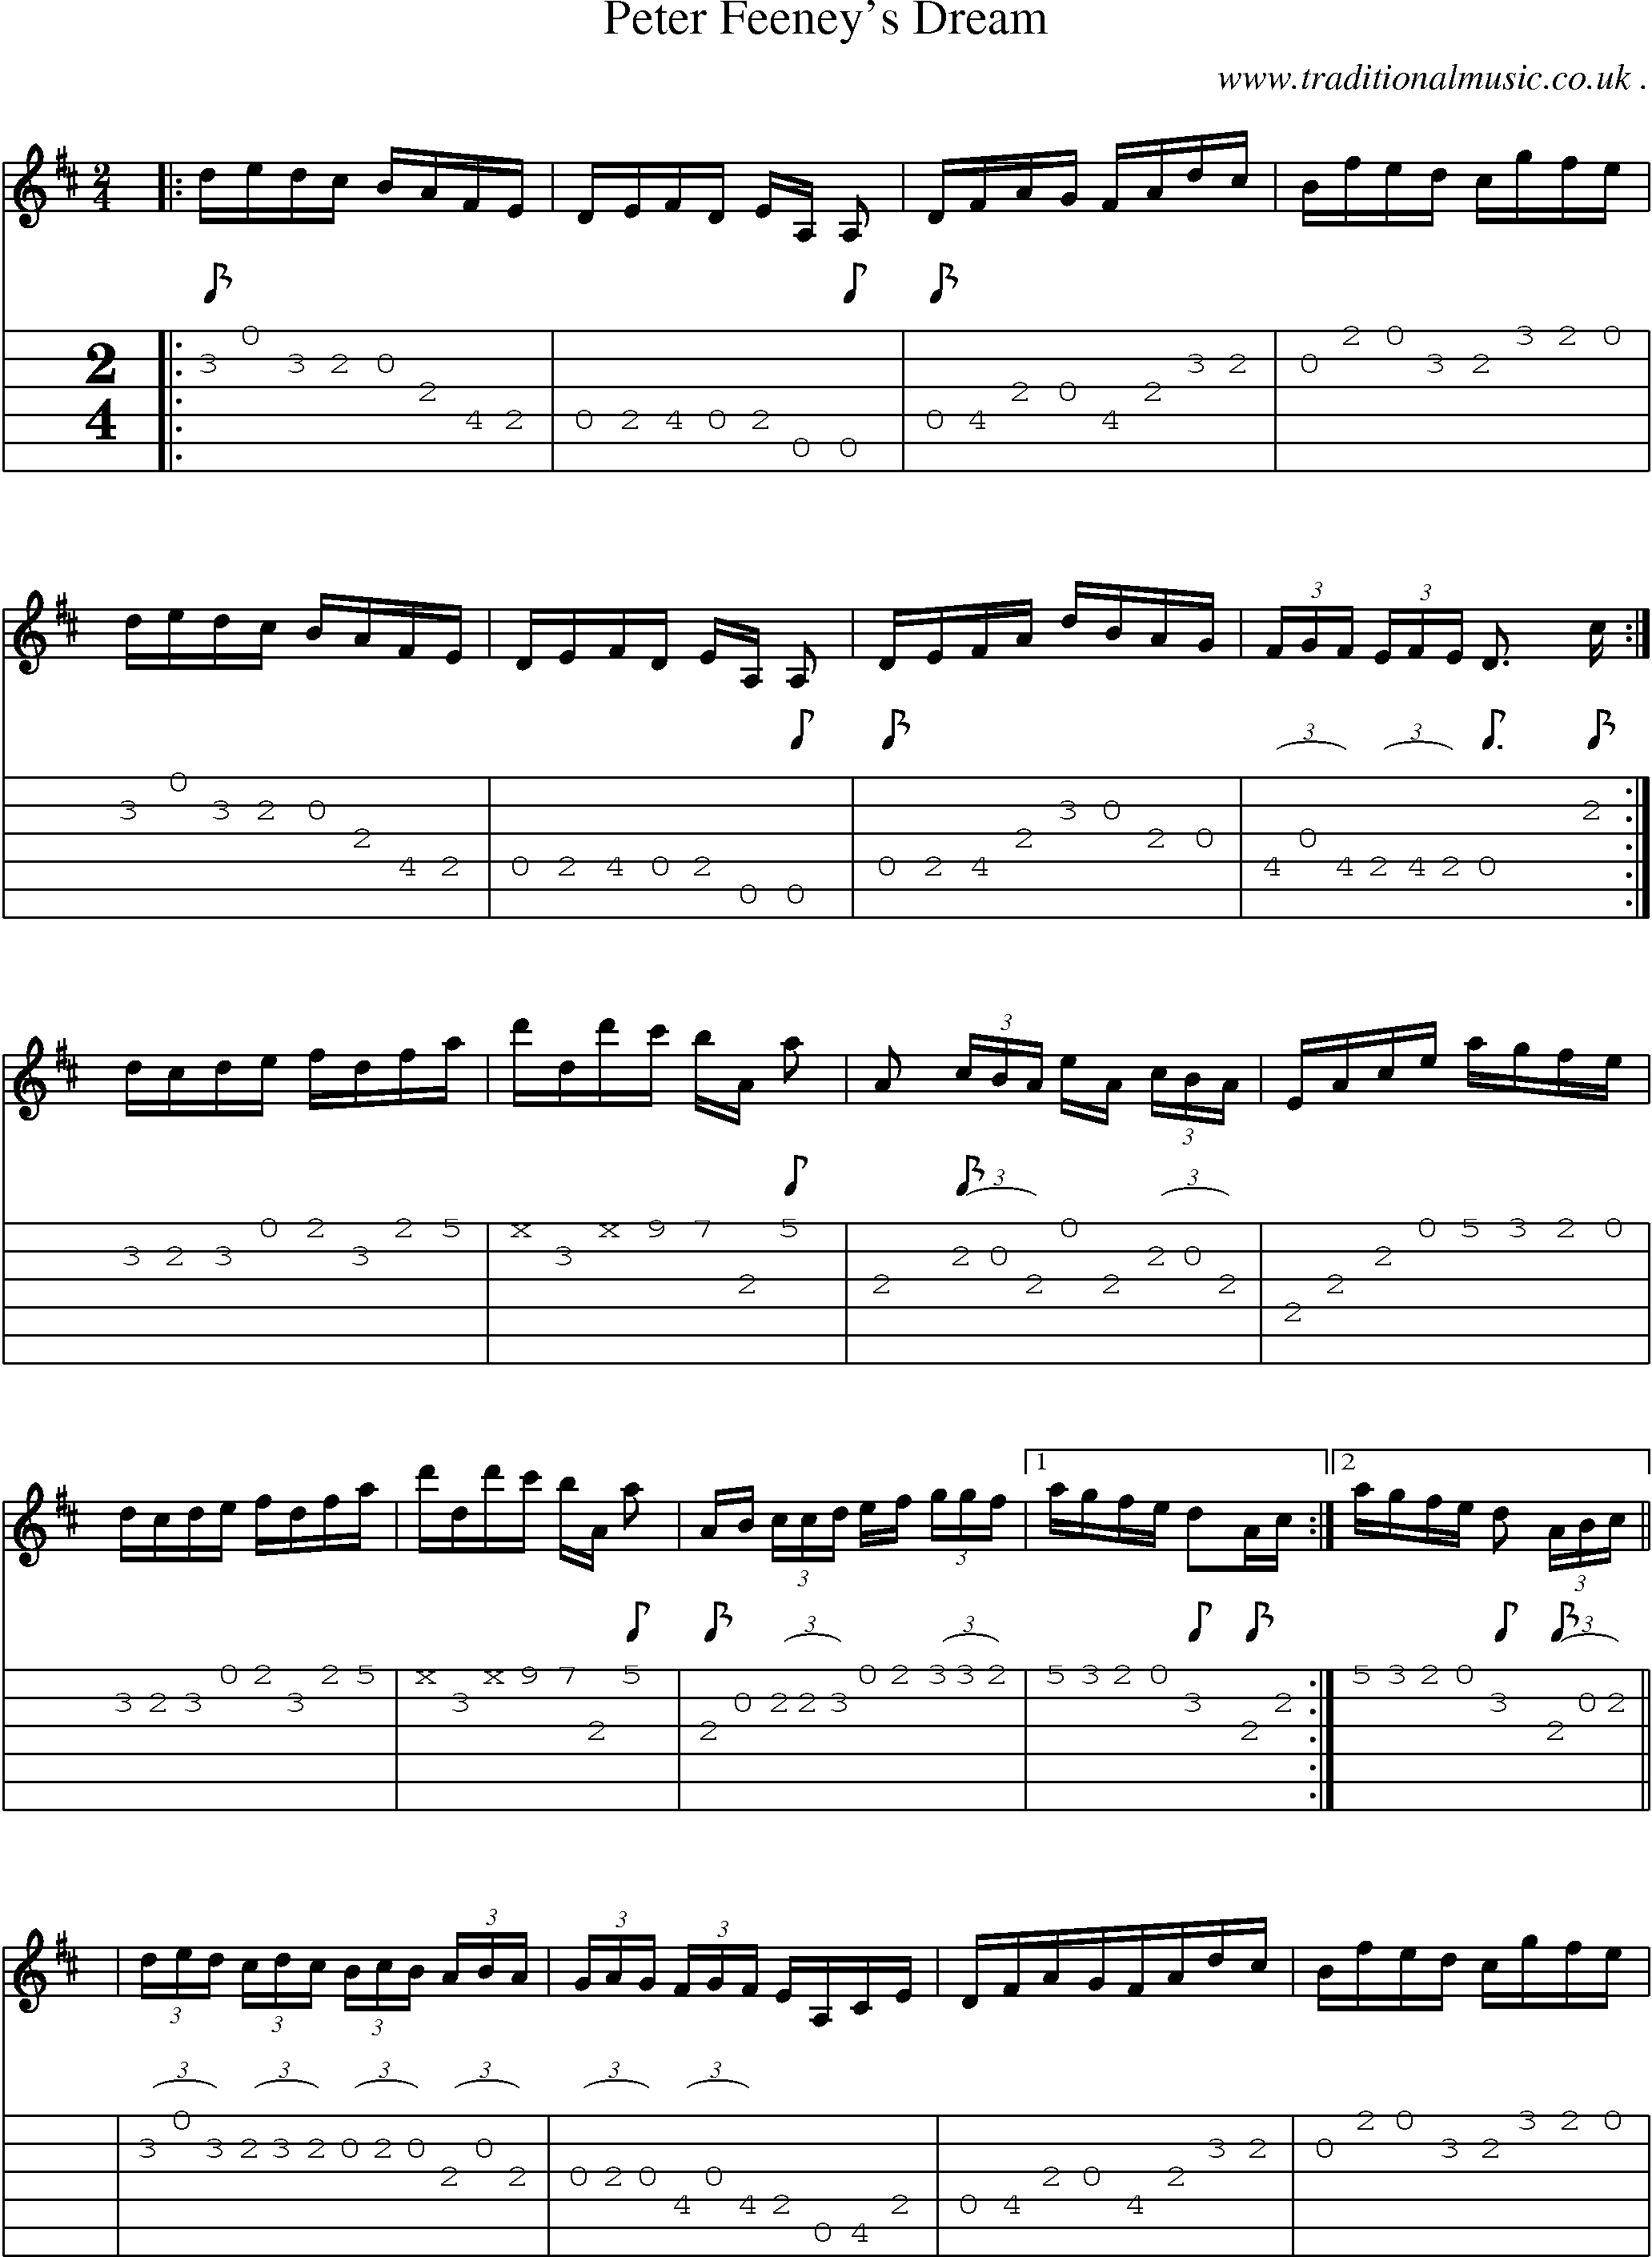 Sheet-Music and Guitar Tabs for Peter Feeneys Dream